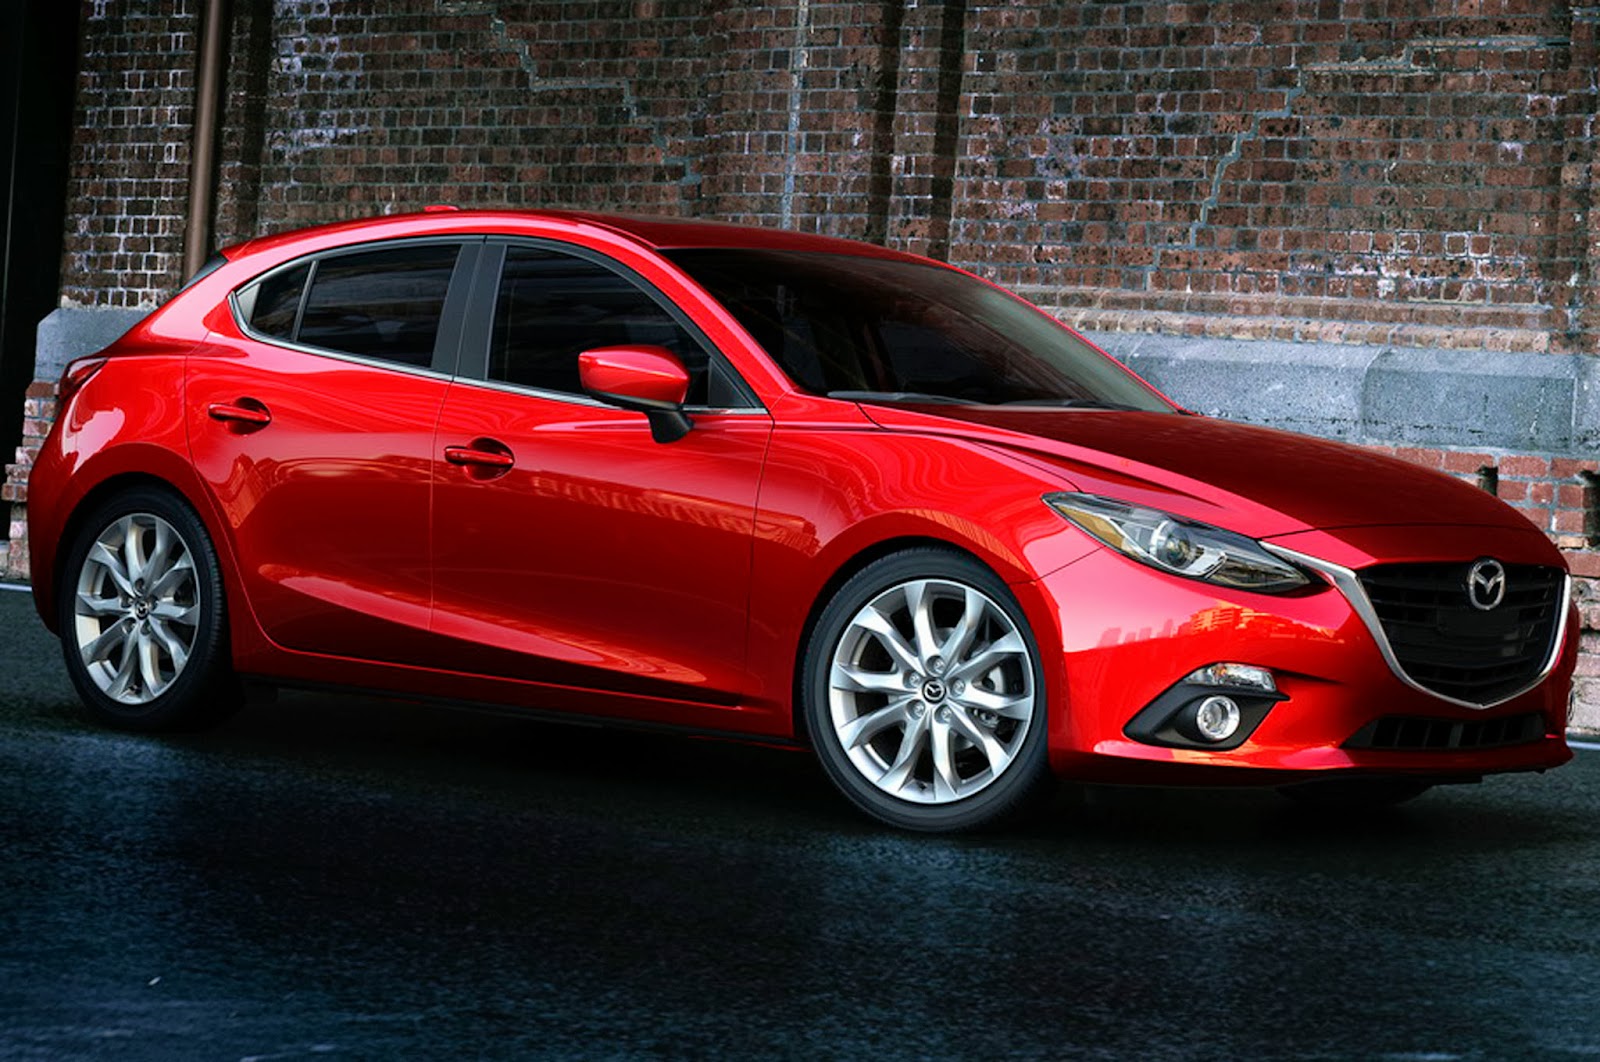 2014 Mazda Mazda3, The Game Changer, All New, Fuel Efficient Compact Car -  Thelen Mazda Blog